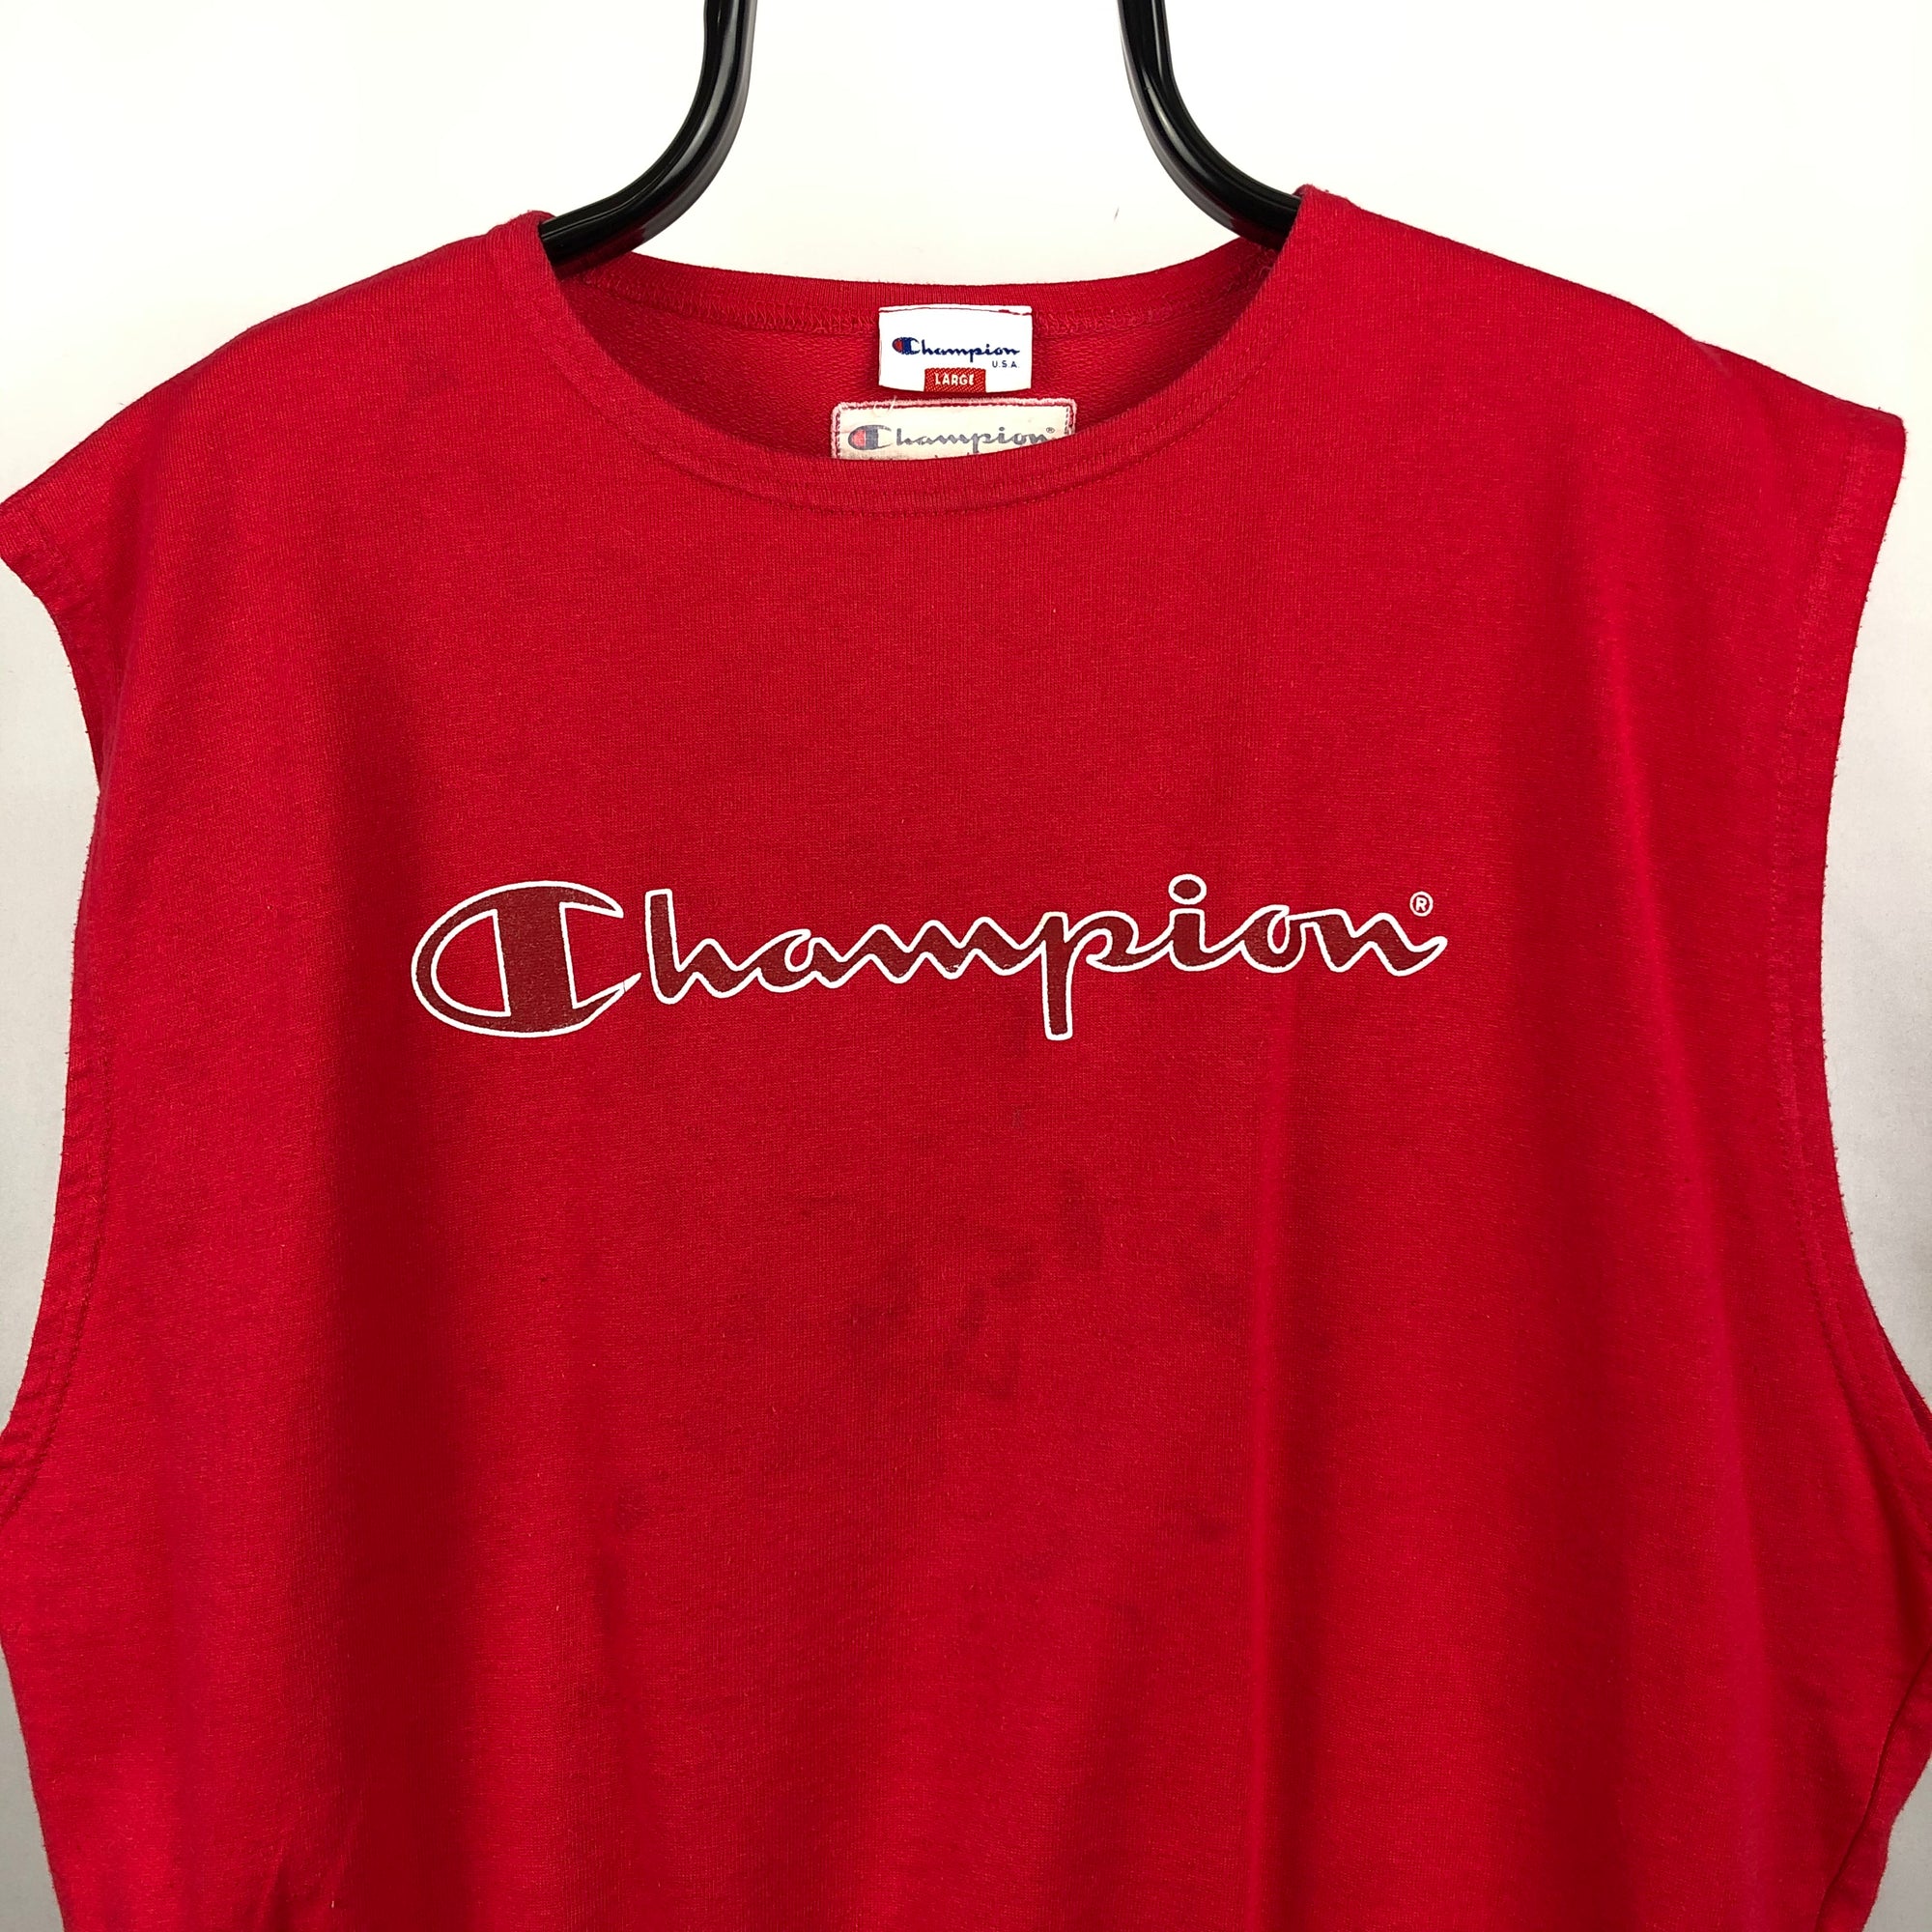 Vintage Champion Spellout Sweater Vest in Deep Pink/Red - Men's Large/Women's XL